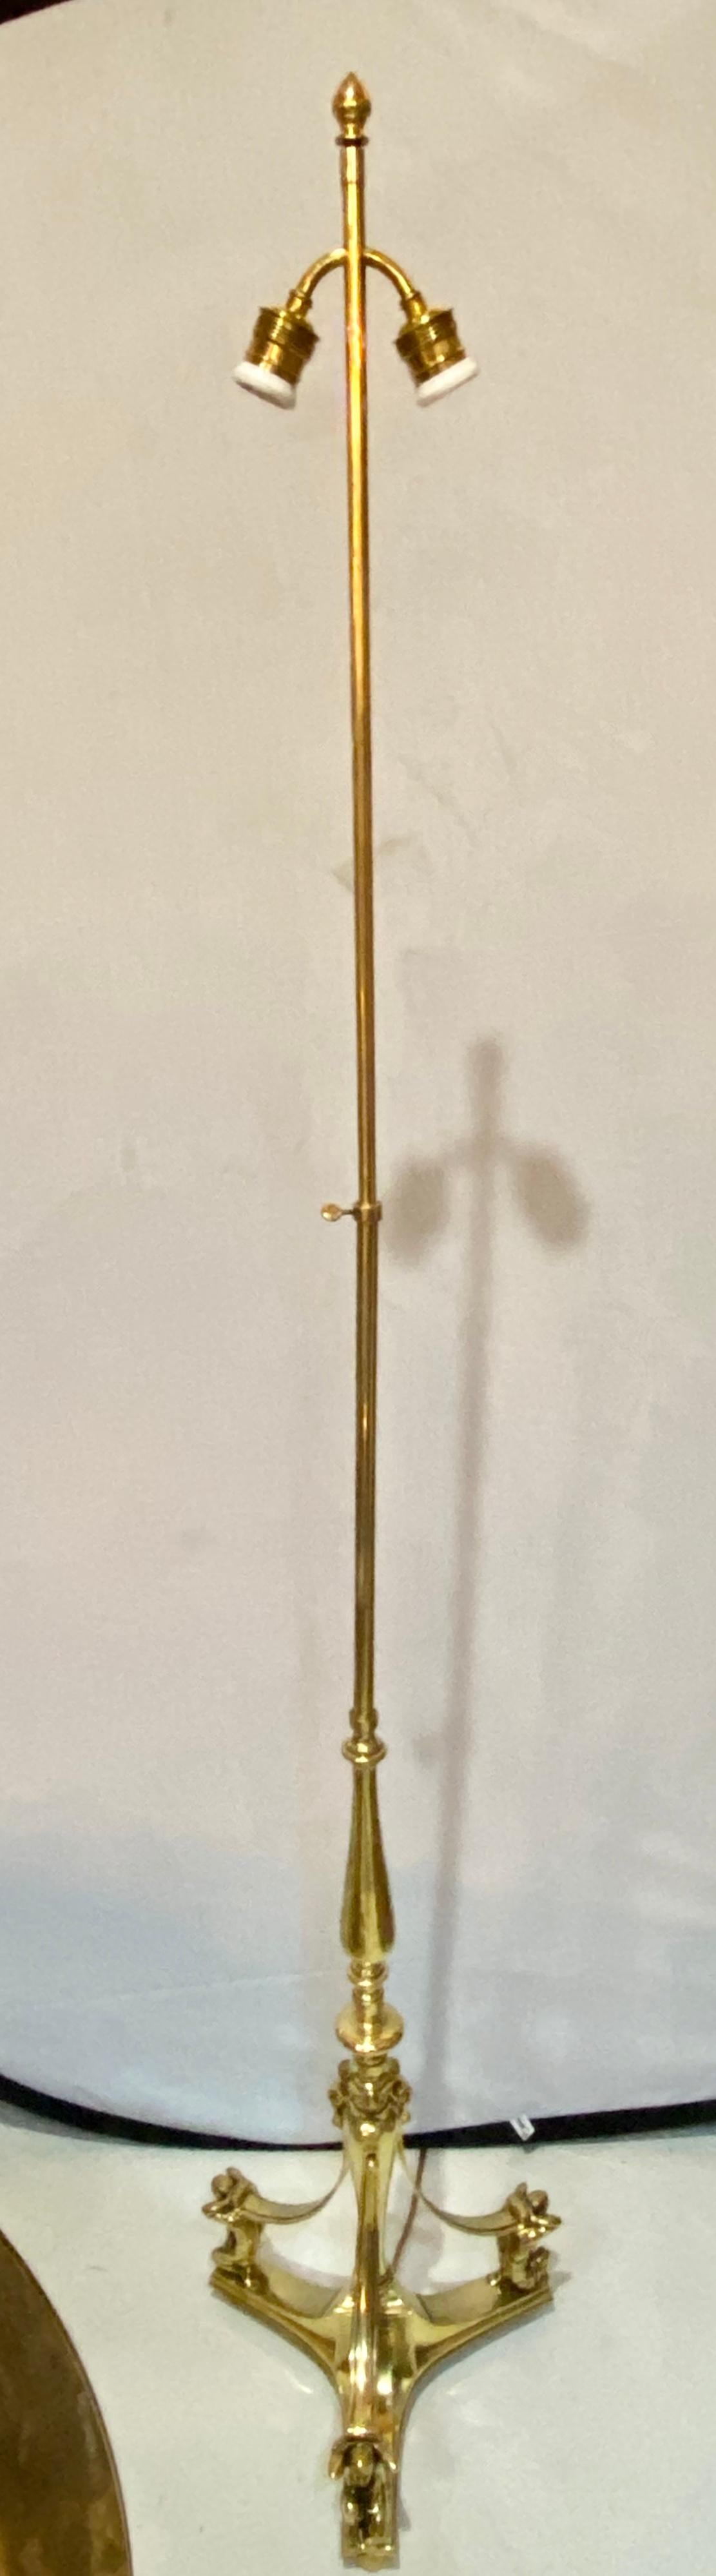 19th-20th century Atlas figural standing tall lamp. This Fine Empire Style bronze standing floor lamp takes one bulb and has a custom lamp shade. The long sleek bronze center column-form supported by a tripod base having three figures of an Atlas